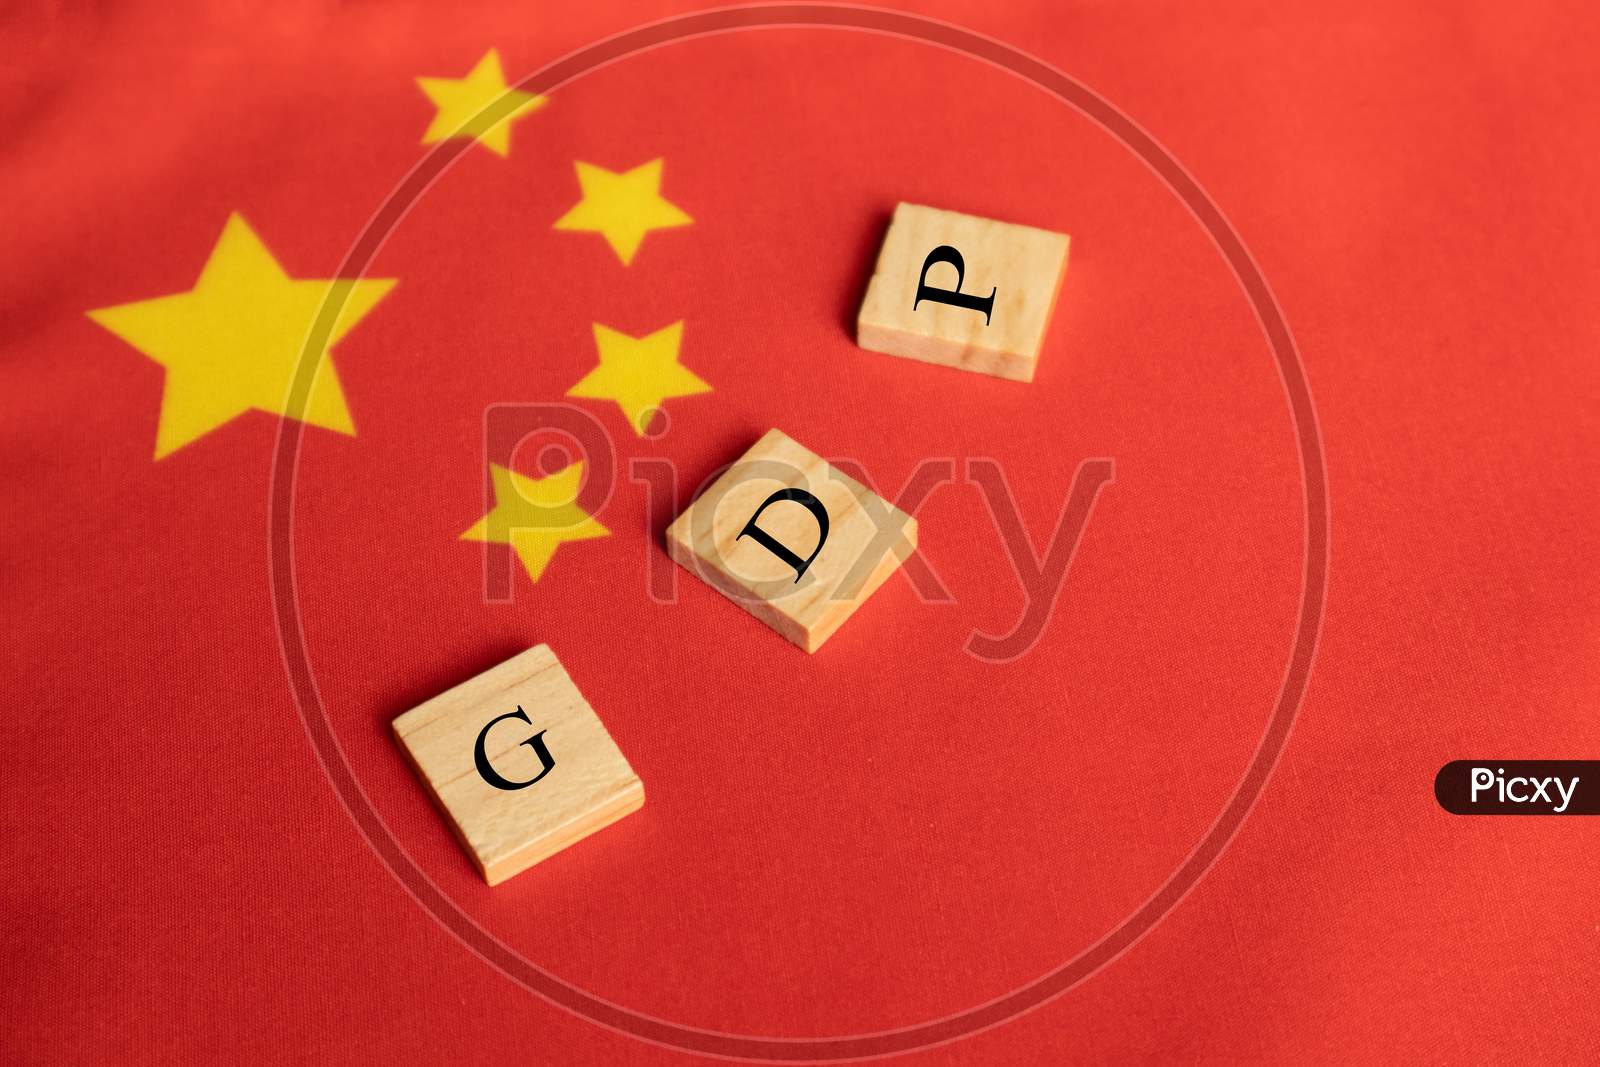 Gross Domestic Product Or Gdp Of China On Wooden Block Letters On Chinese Flag.